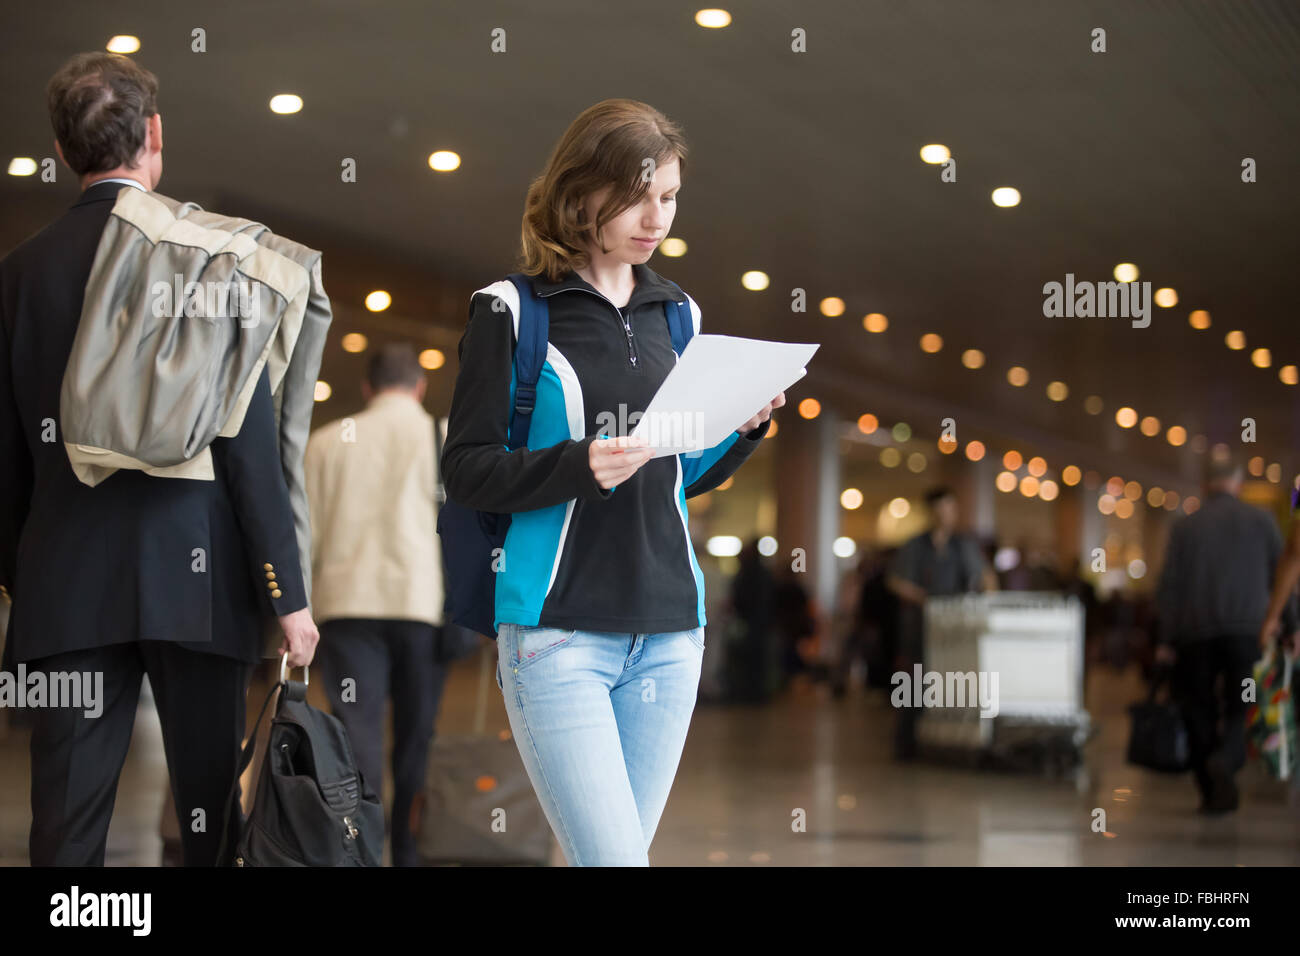 Portrait of young woman in 20s with backpack standing in airport terminal, with printed e-tickets, using cell phone to check in, Stock Photo